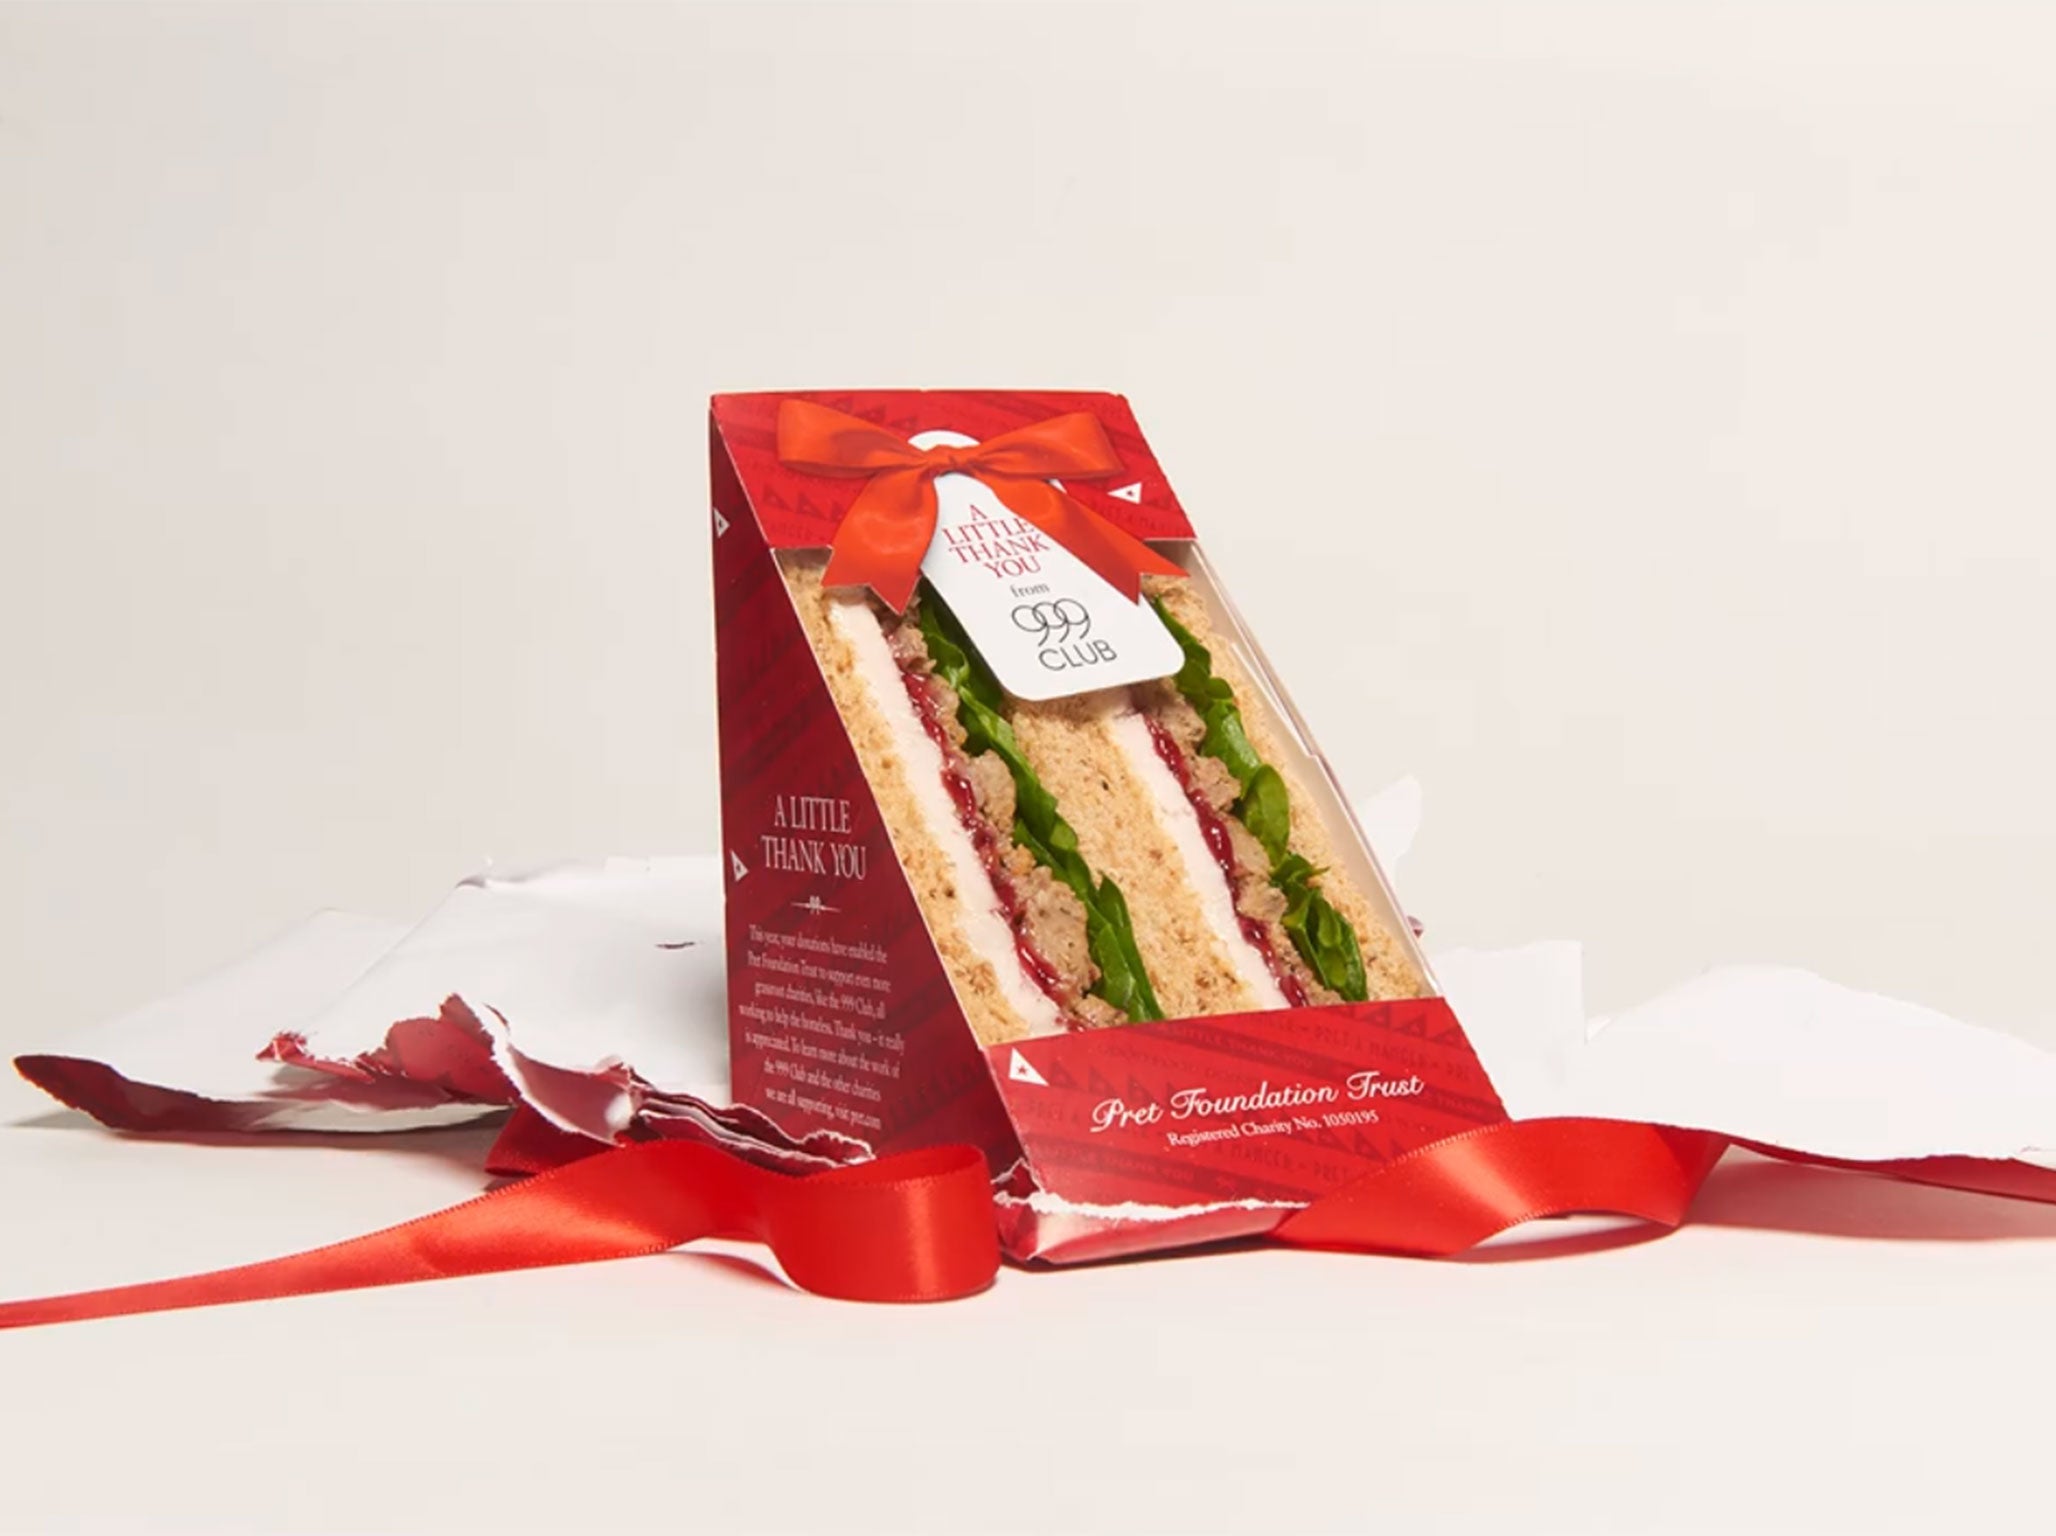 A freshly unwrapped Pret Christmas sandwich, which returned this week